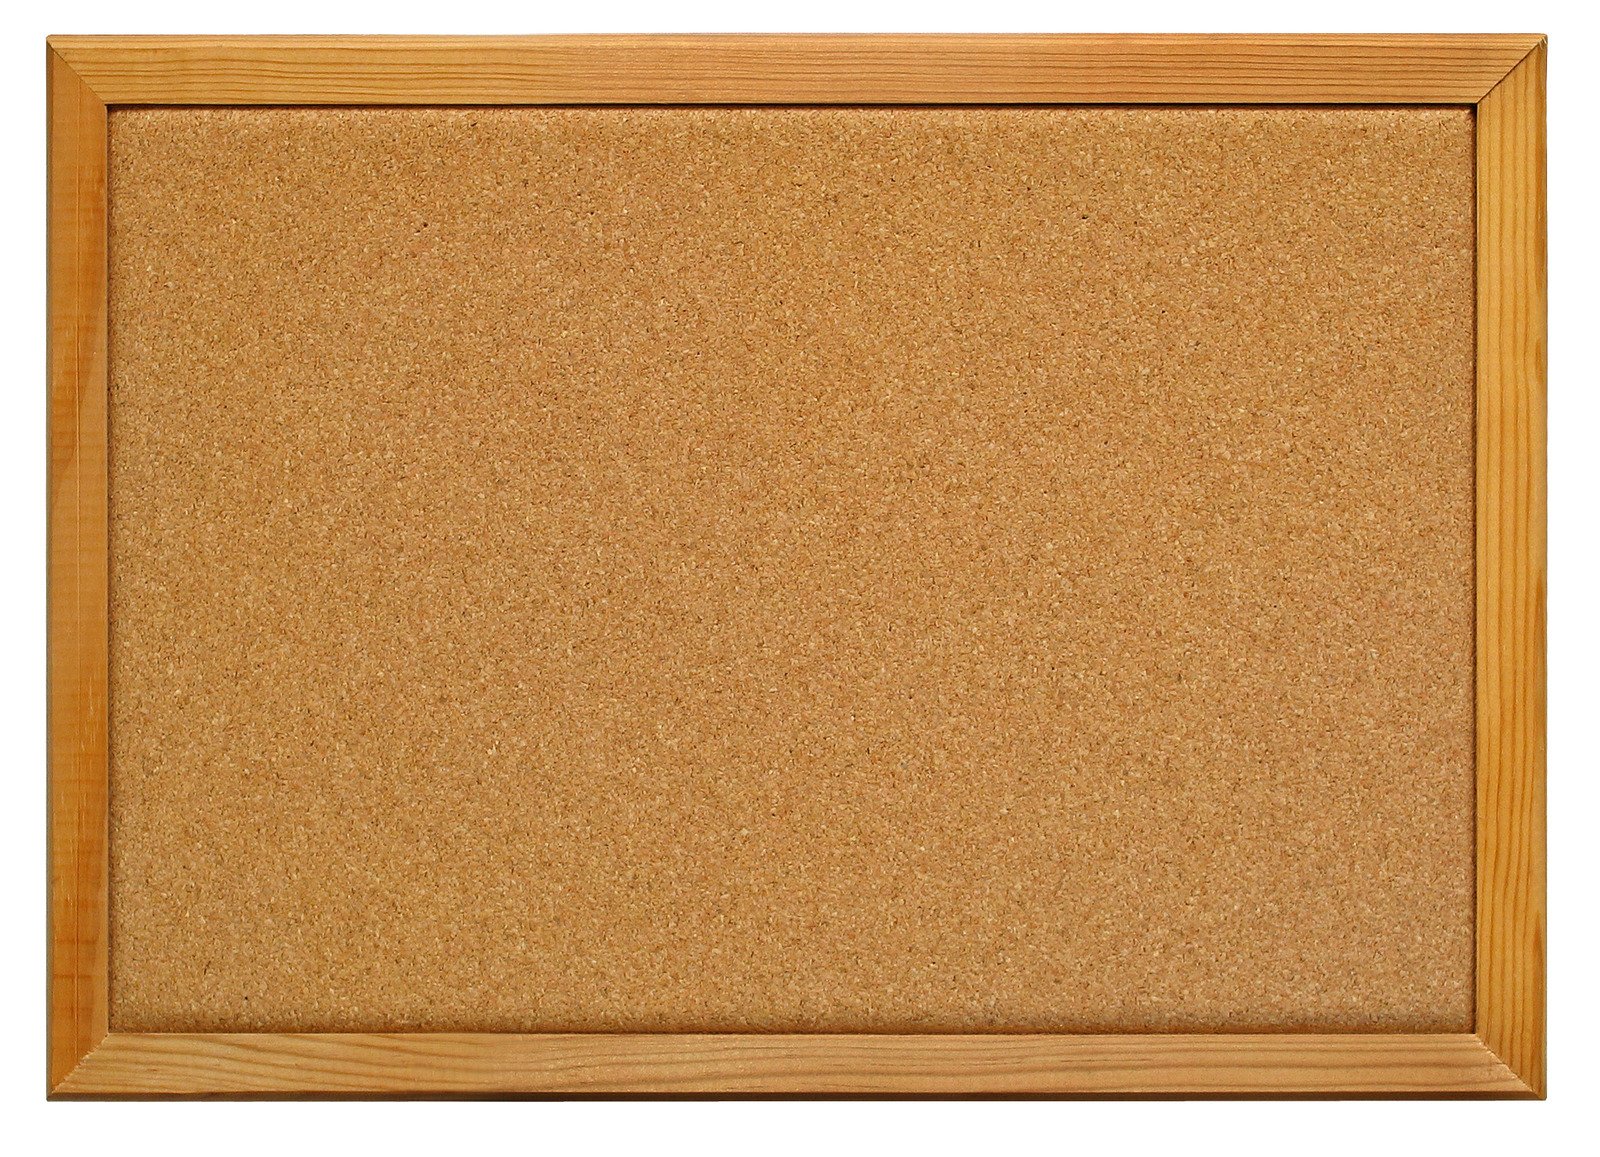 a brown cork notice board is shown with a white background